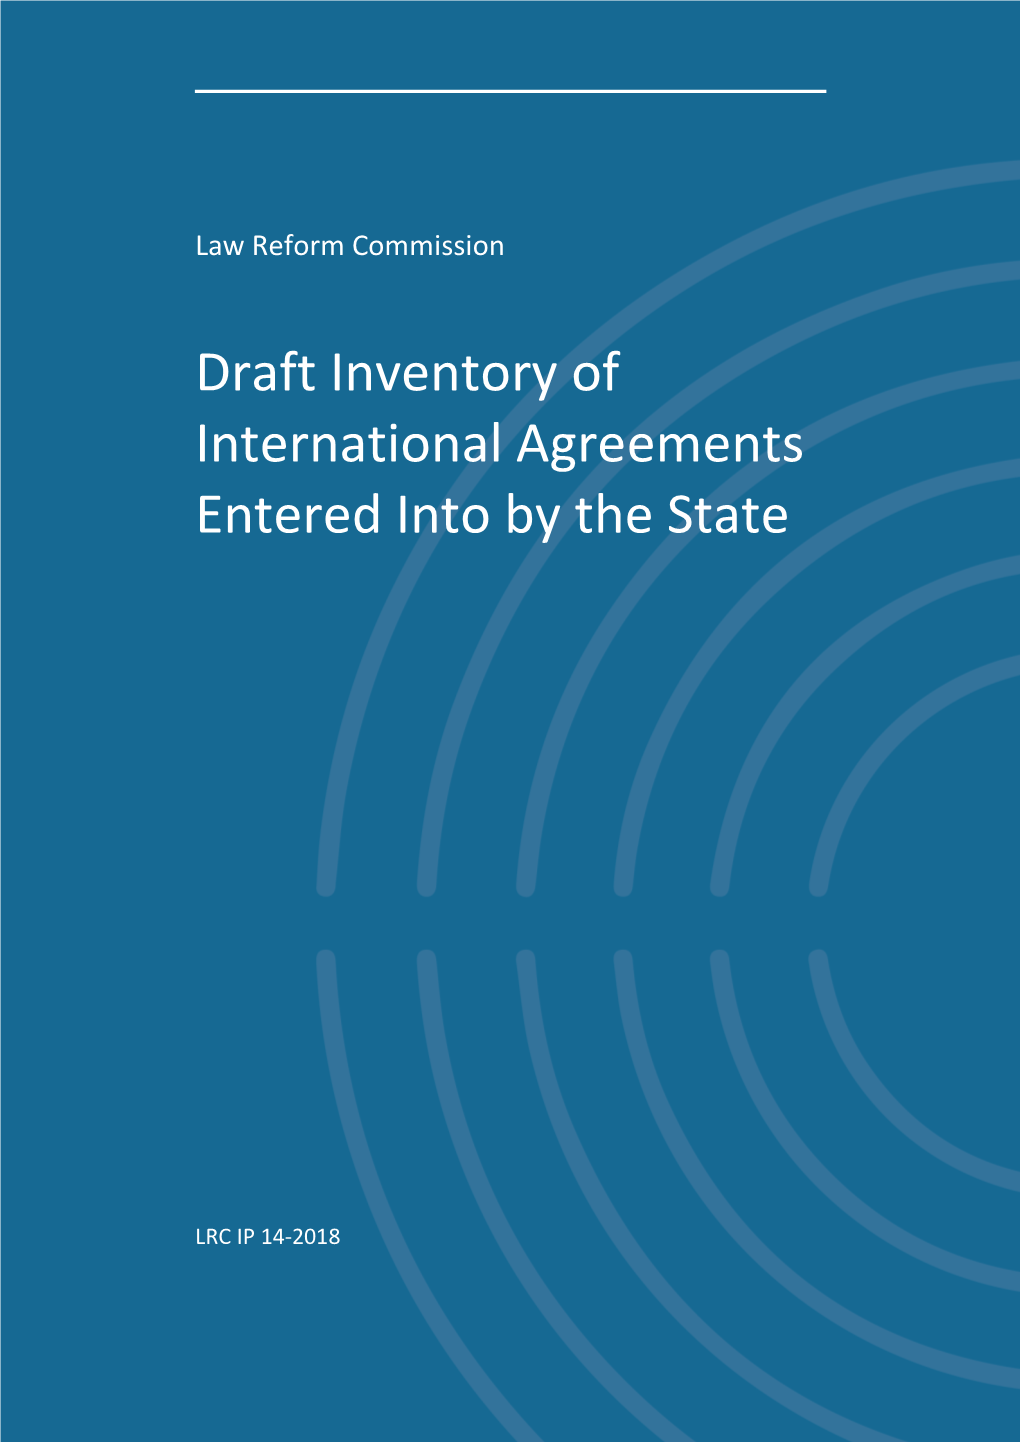 Draft Inventory of International Agreements Entered Into by the State